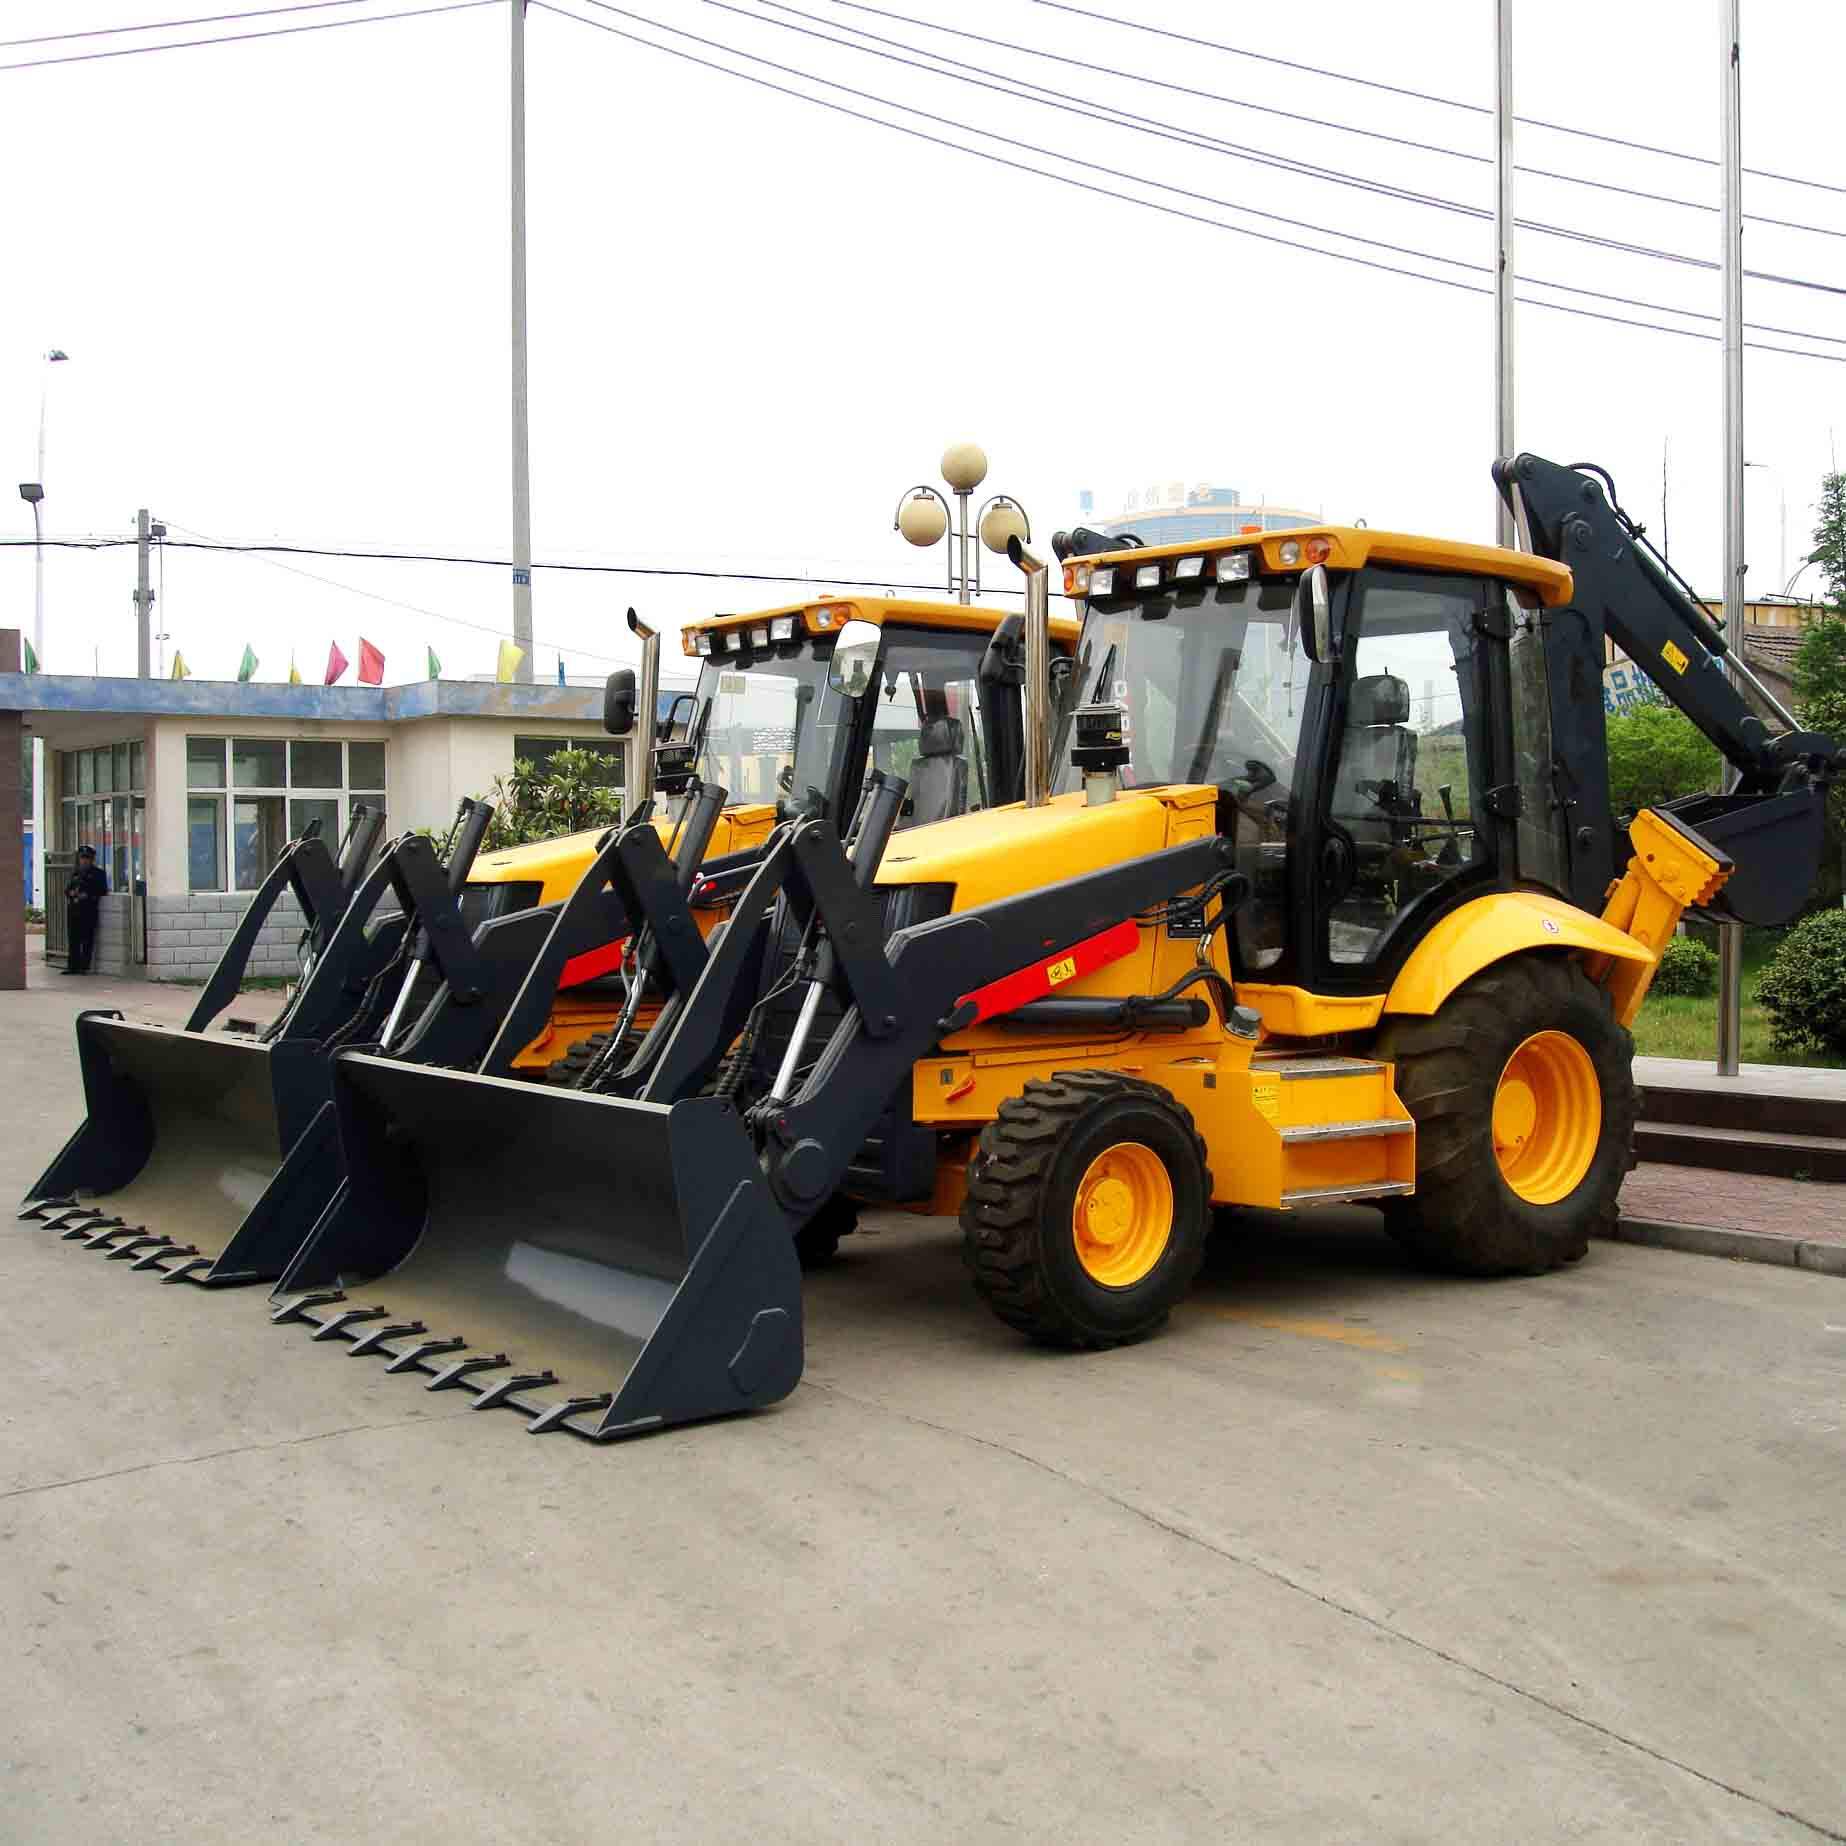 Chinese Compact Backhoe Excavator Loader With Spare Parts XT870 details